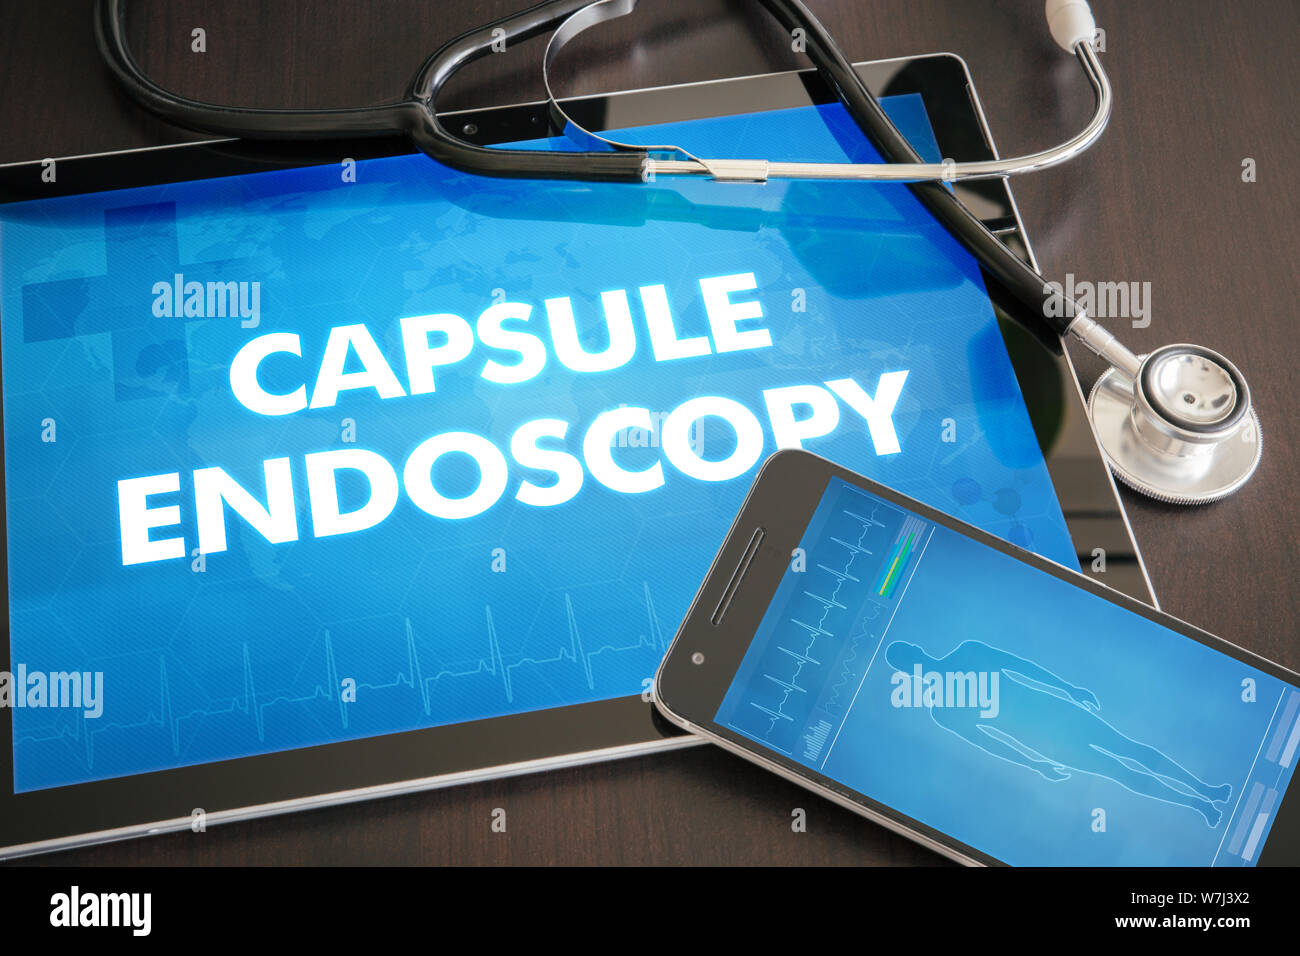 Capsule endoscopy (gastrointestinal disease related) diagnosis medical concept on tablet screen with stethoscope. Stock Photo